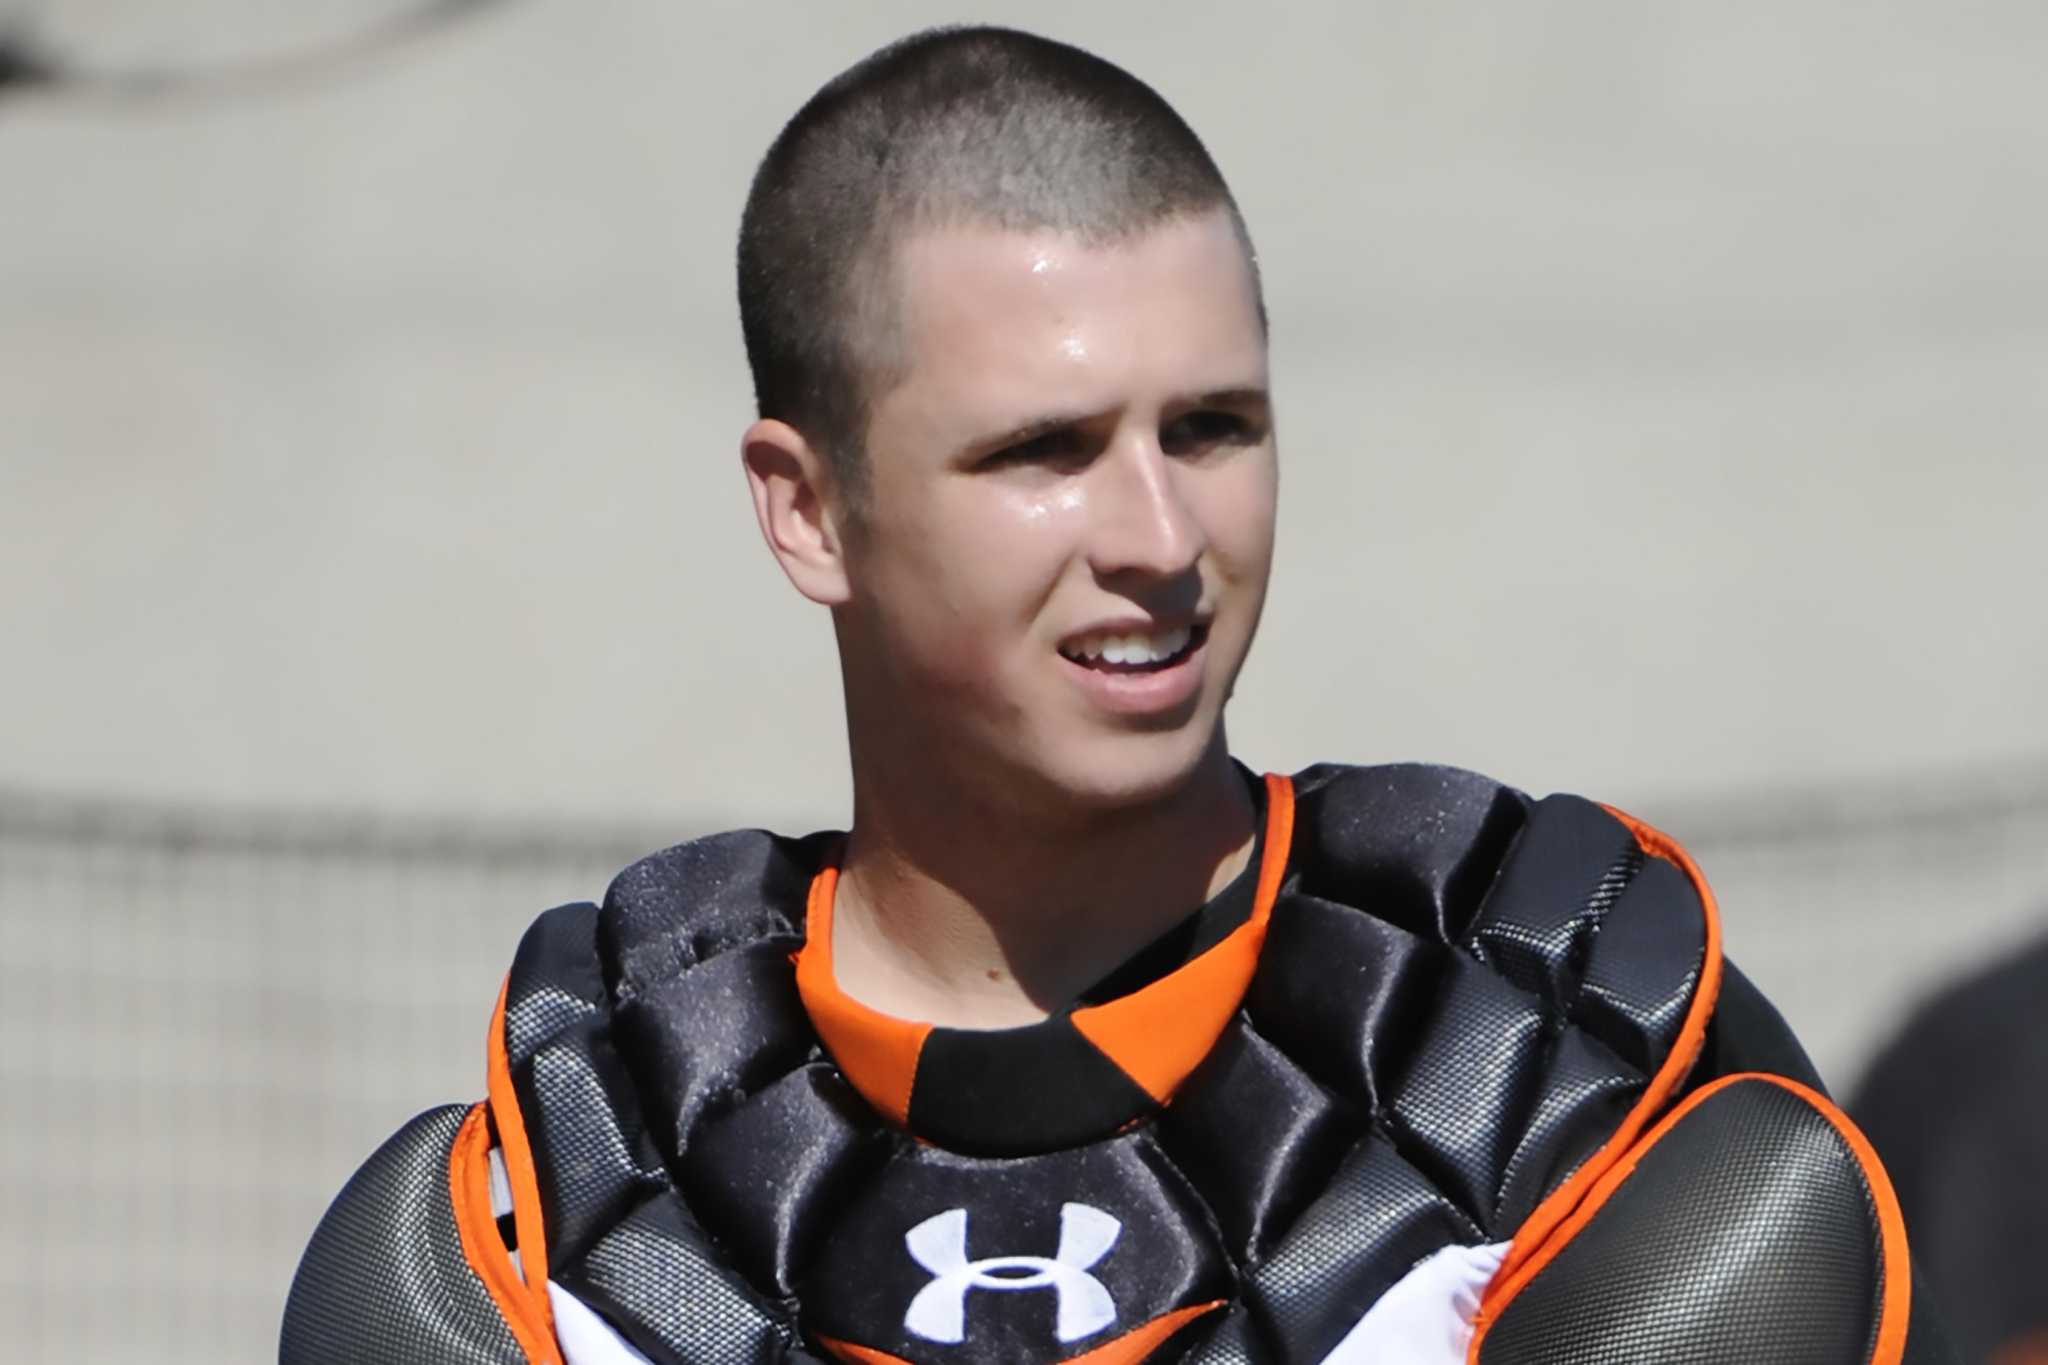 Buster Posey heads glitzy Bay Area Sports Hall of Fame class